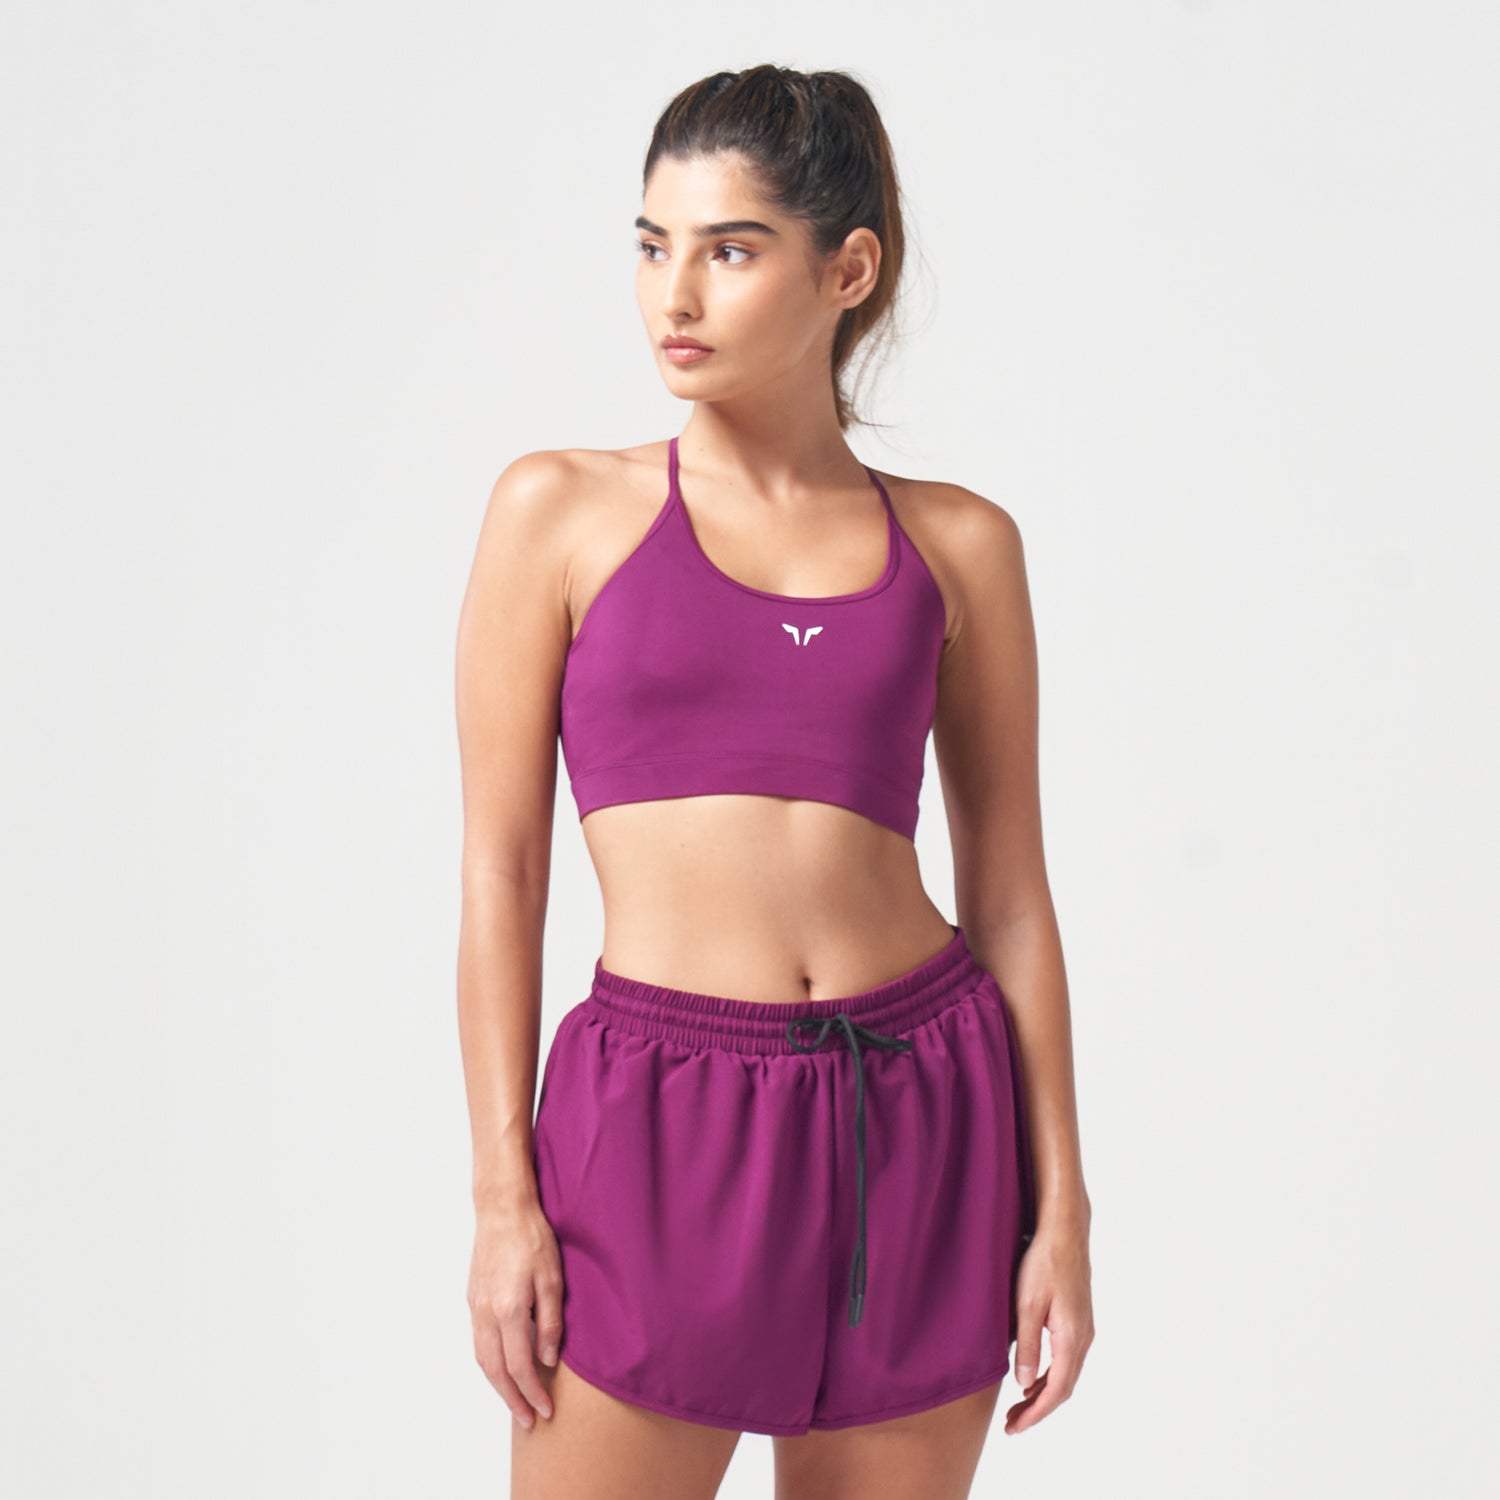 squatwolf-workout-clothes-essential-low-impact-bra-purple-sports-bra-for-gym